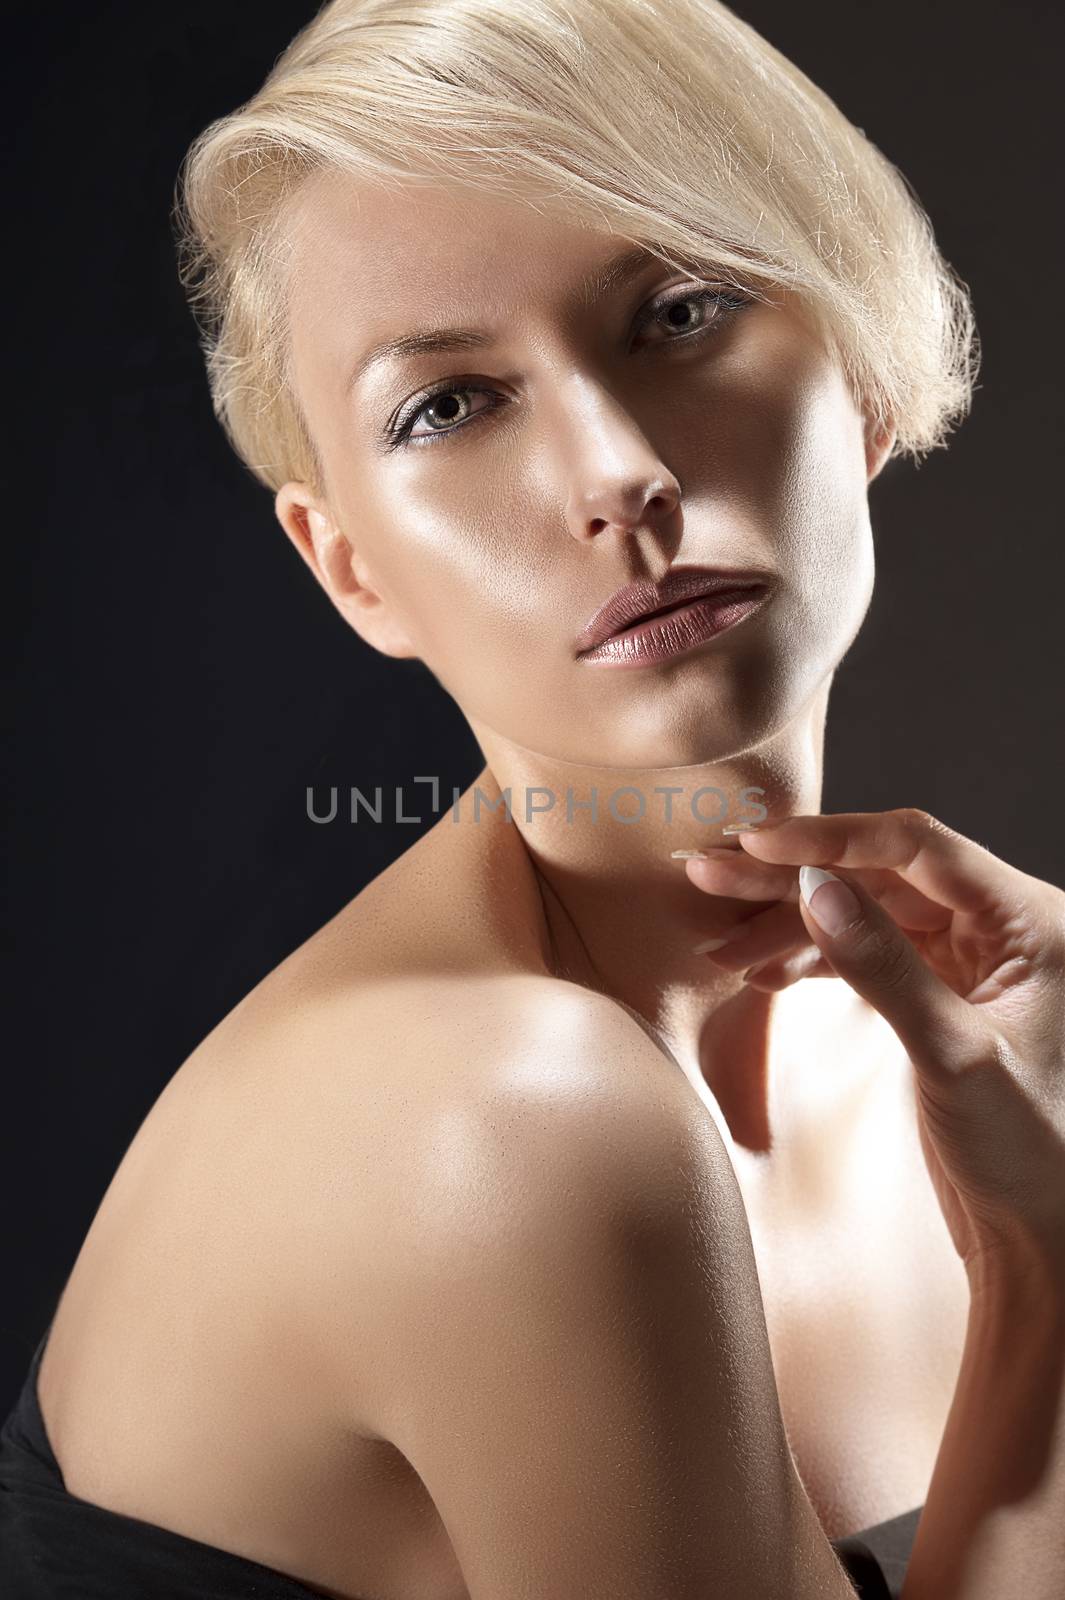 Emotive dark portrait of a blond young woman with an up do and naked shoulder on black background